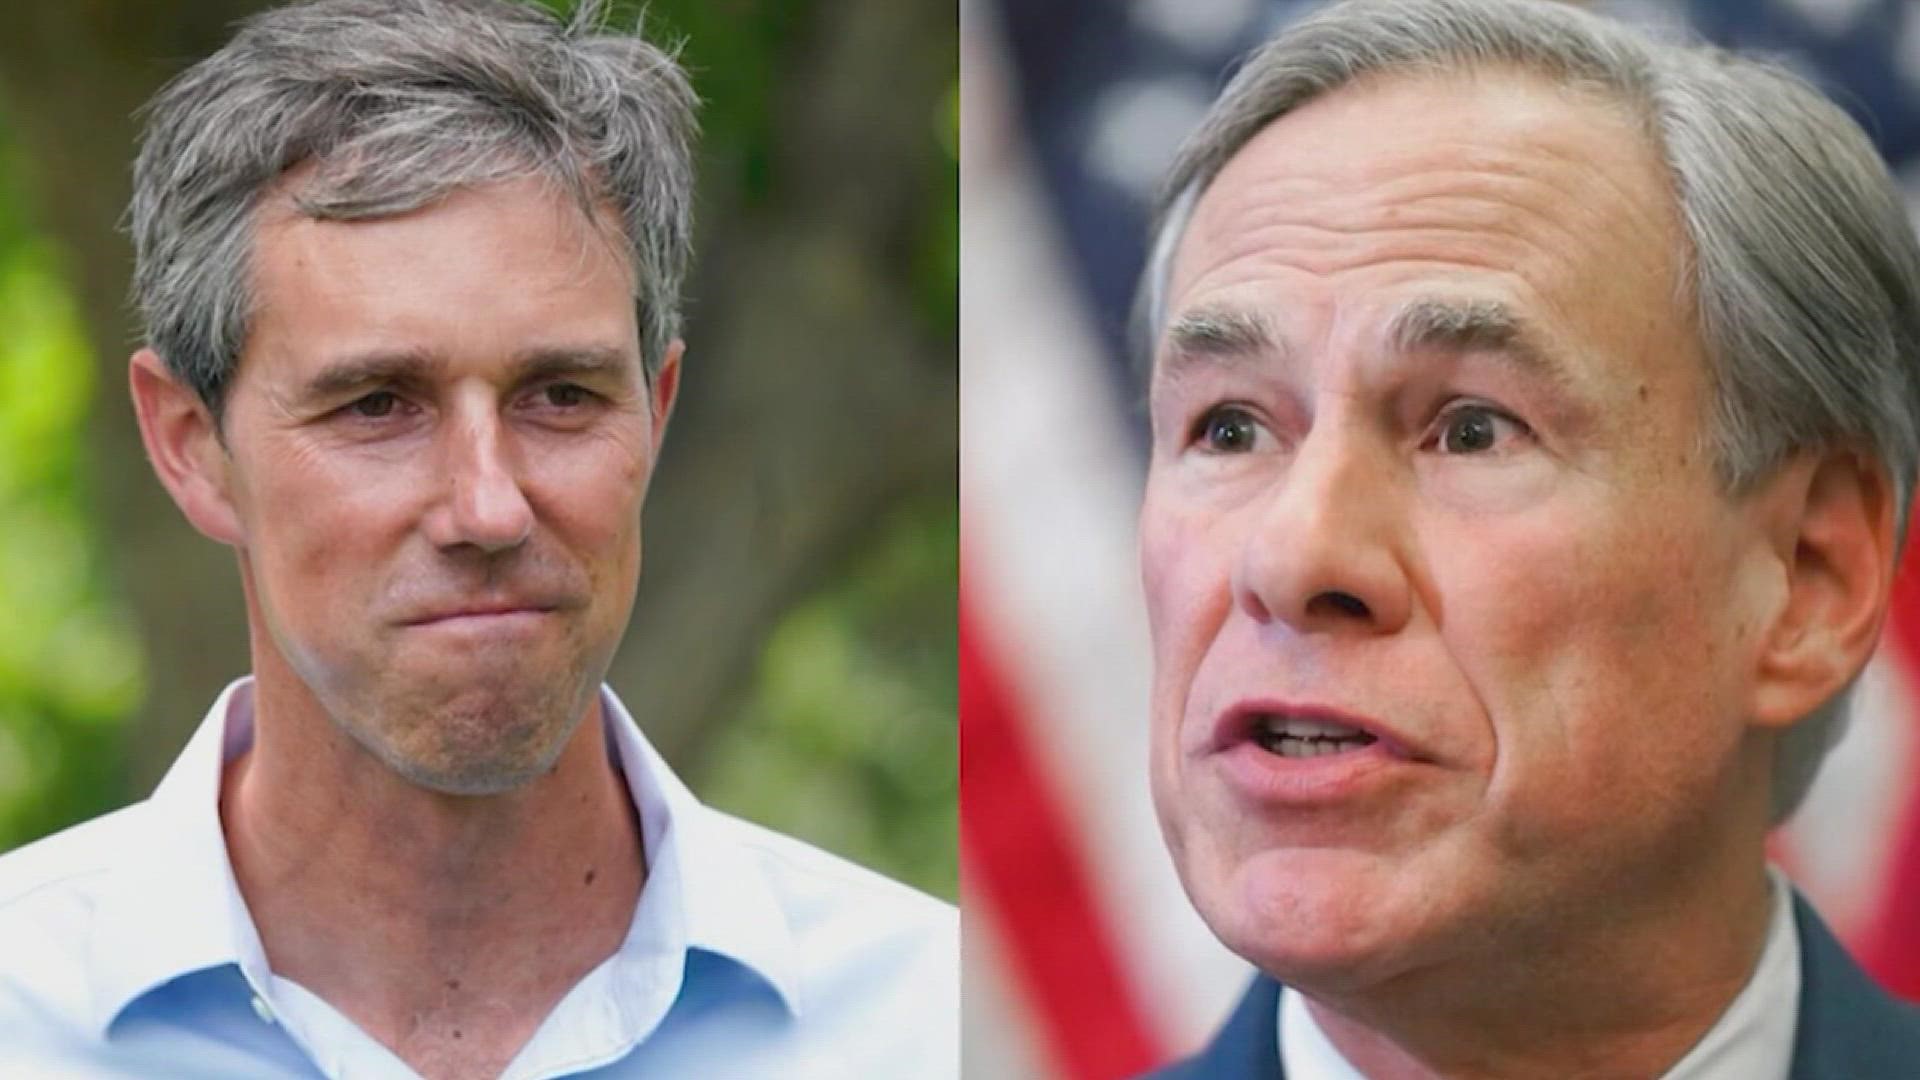 Abbott's campaign said the upcoming debate is the only one O'Rourke was willing to do.